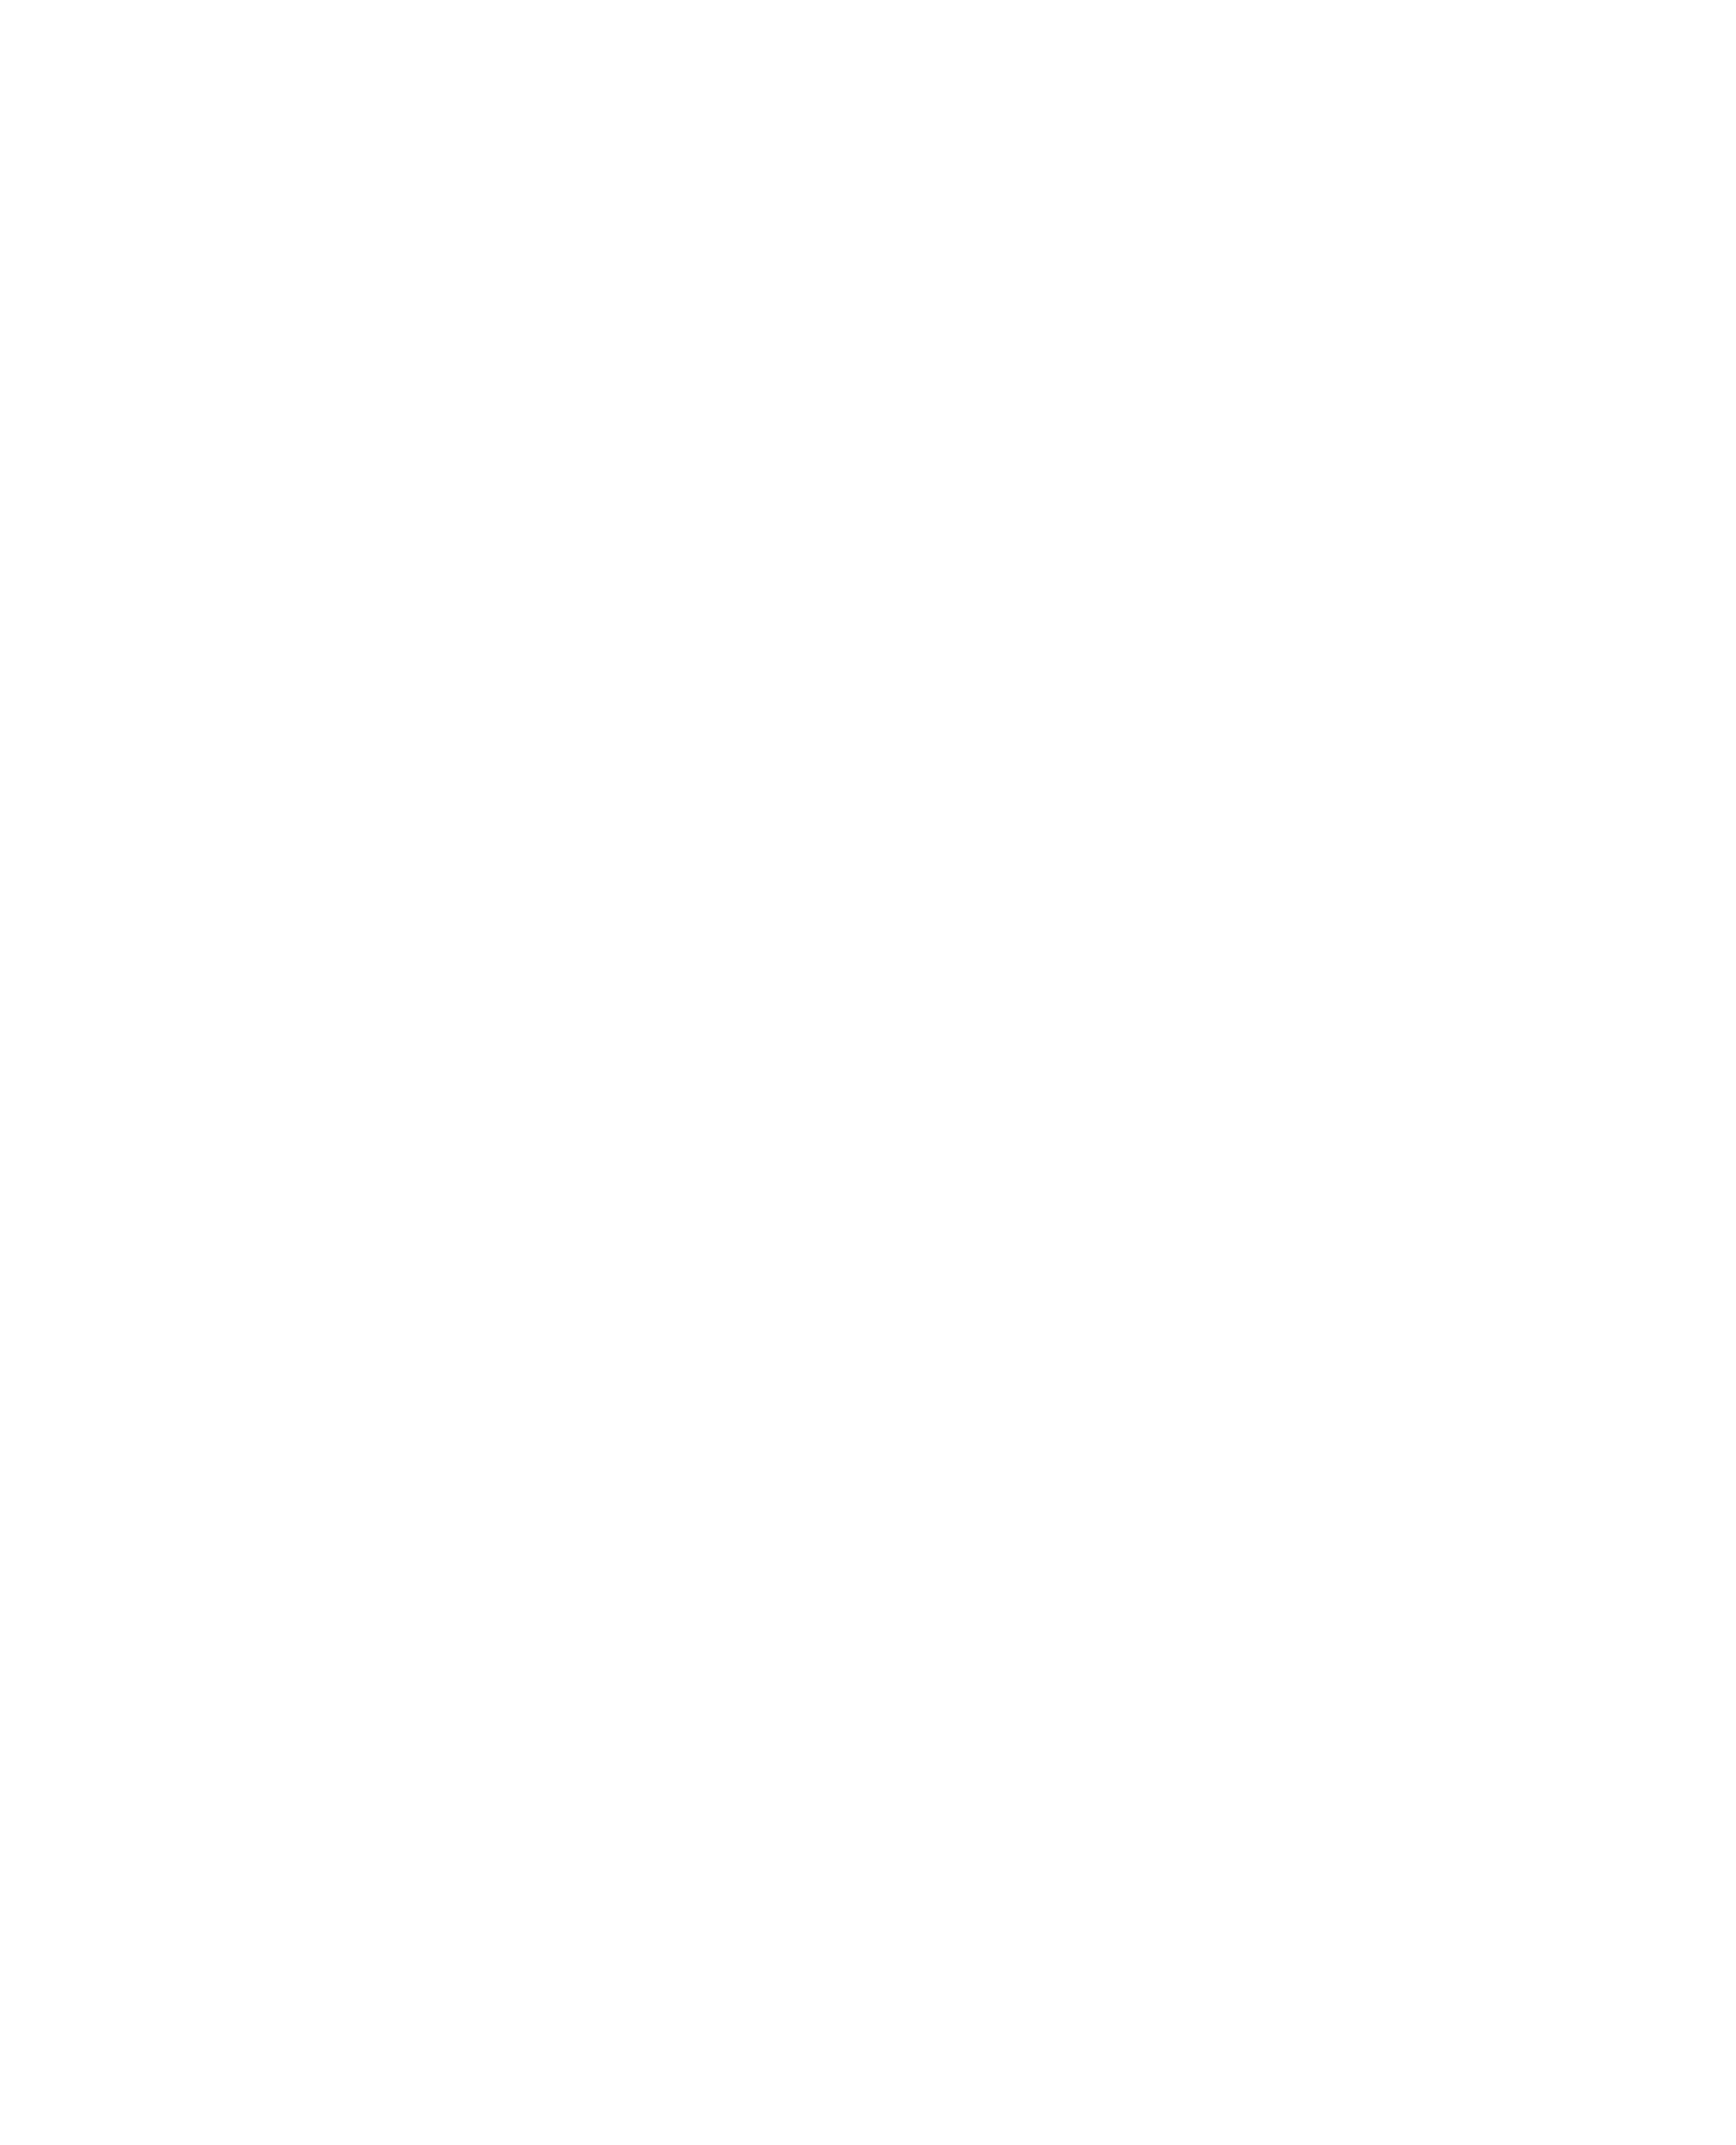 Picture of the JavaScript logo.